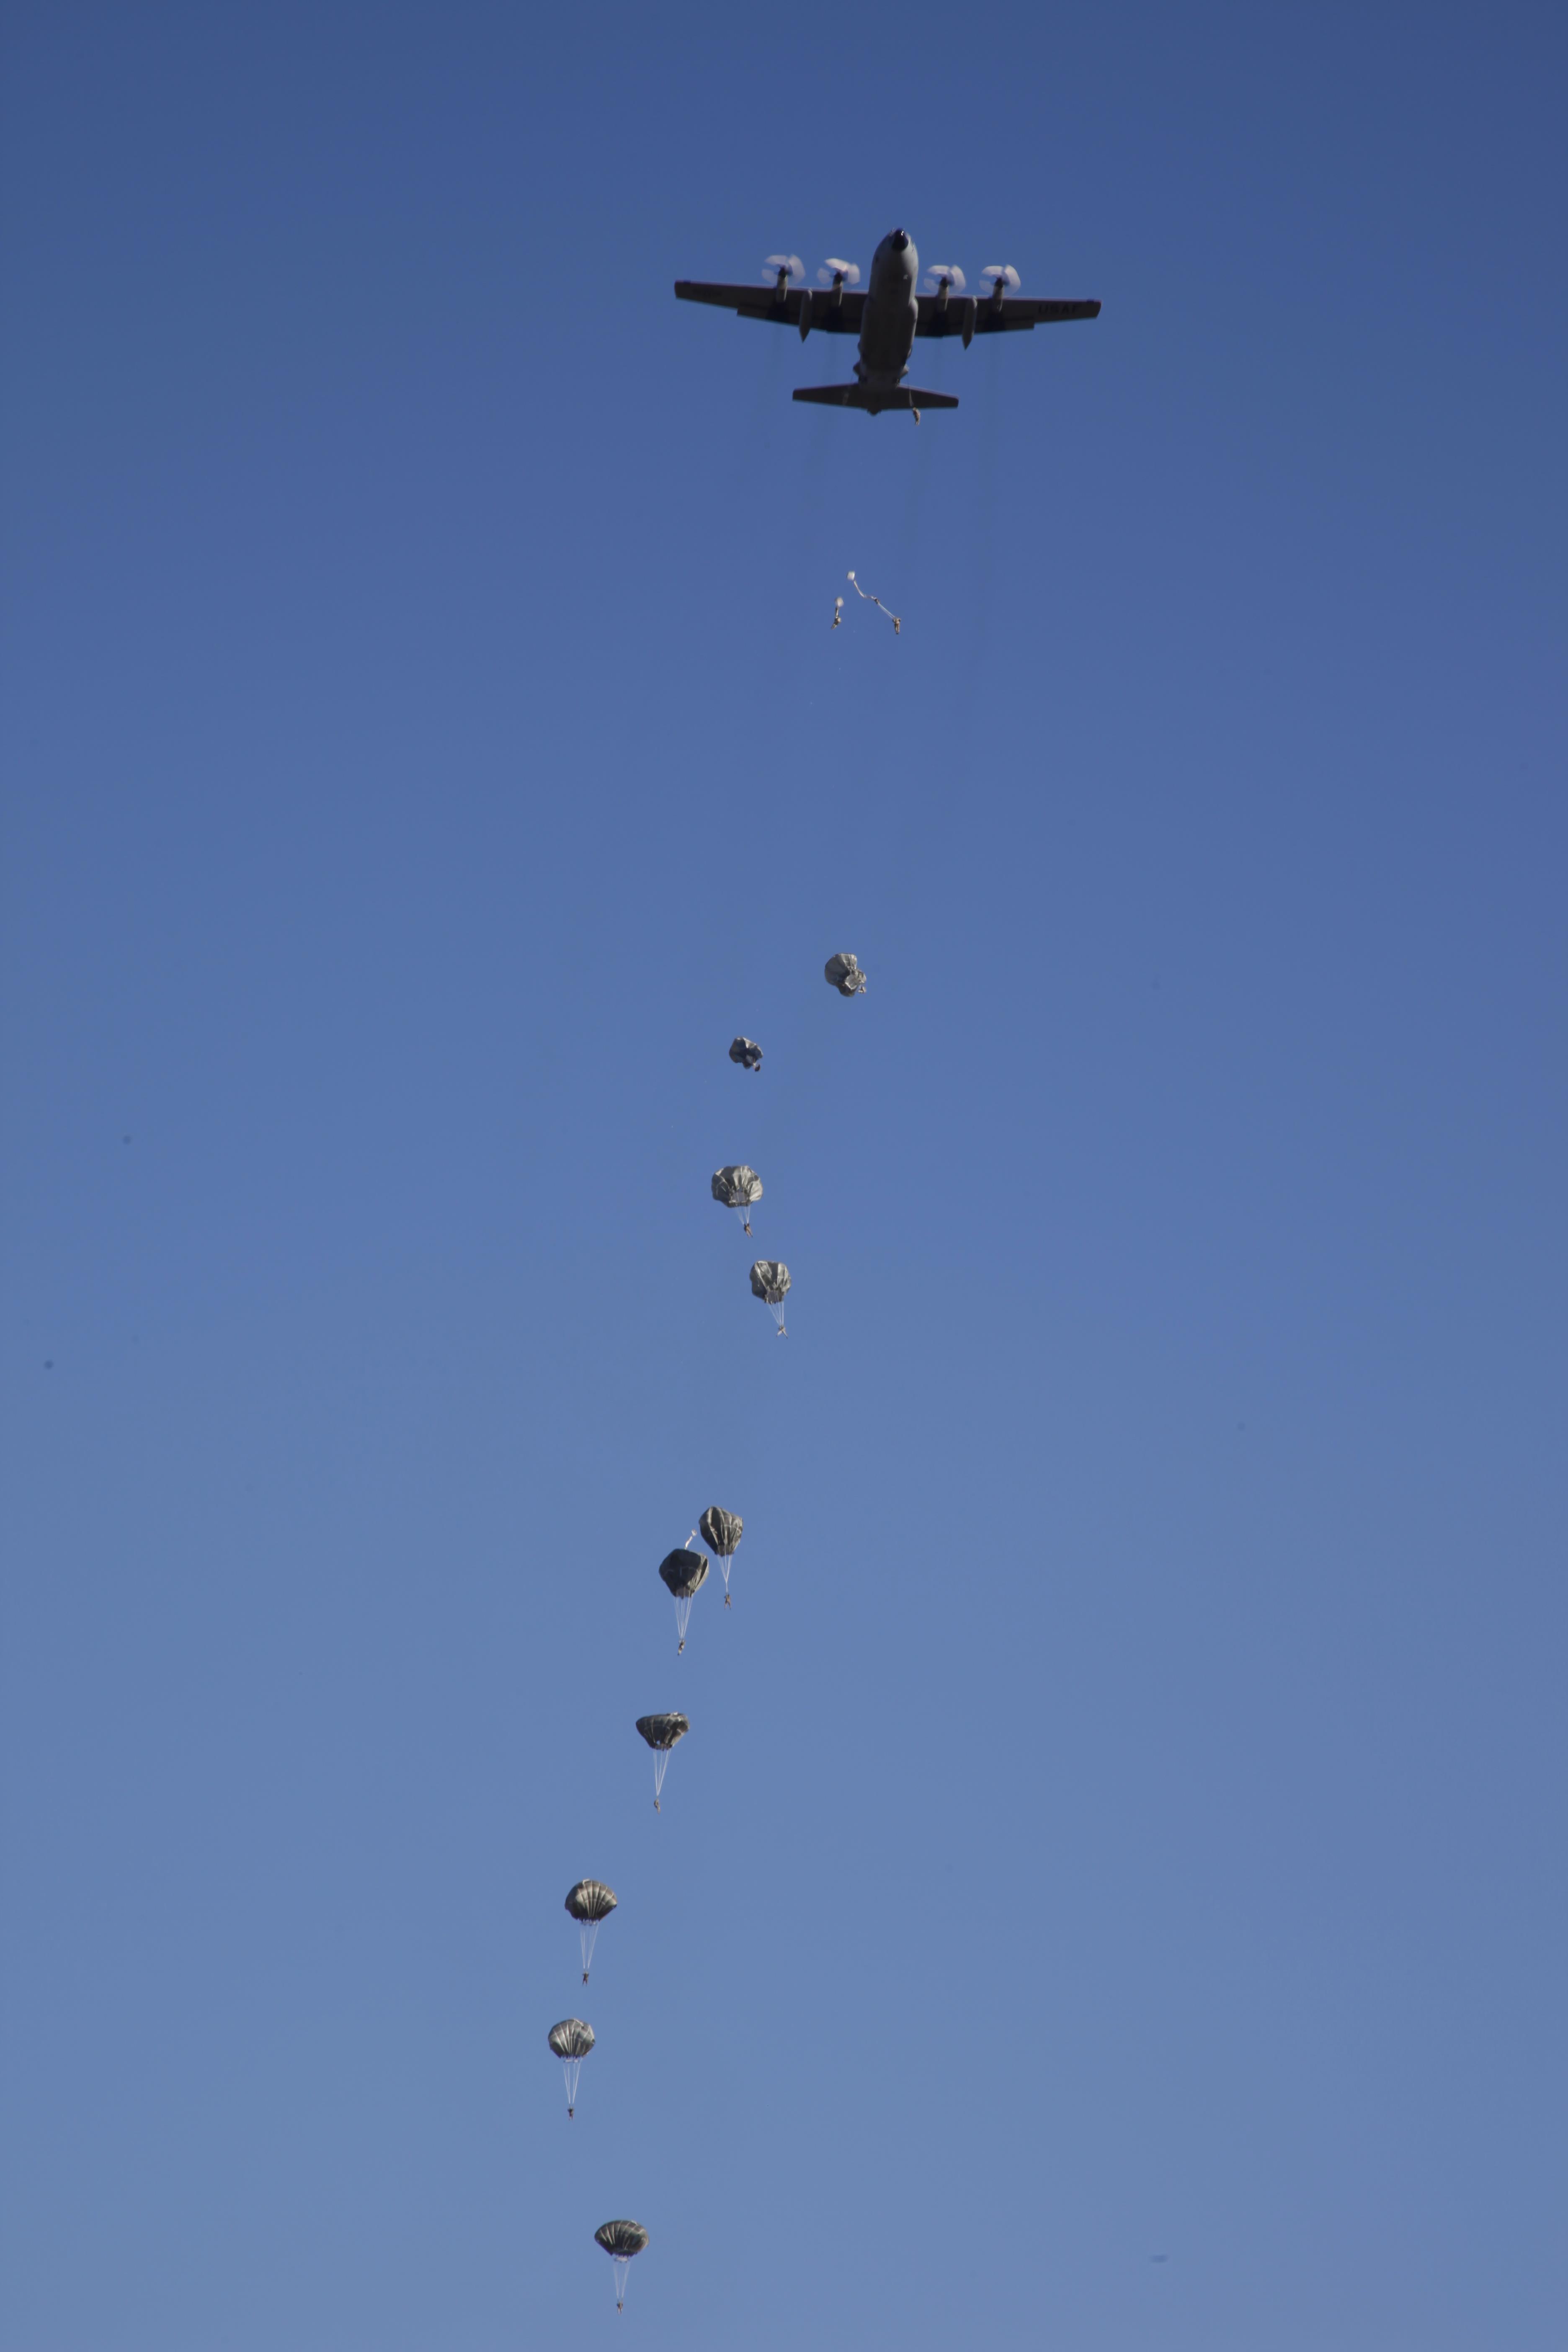 U.S. Army paratroopers descend on Sicily Drop Zone from a C-130 aircraft during an airborne operation for the 18th Annual Randy Oler Memorial Operation Toy Drop